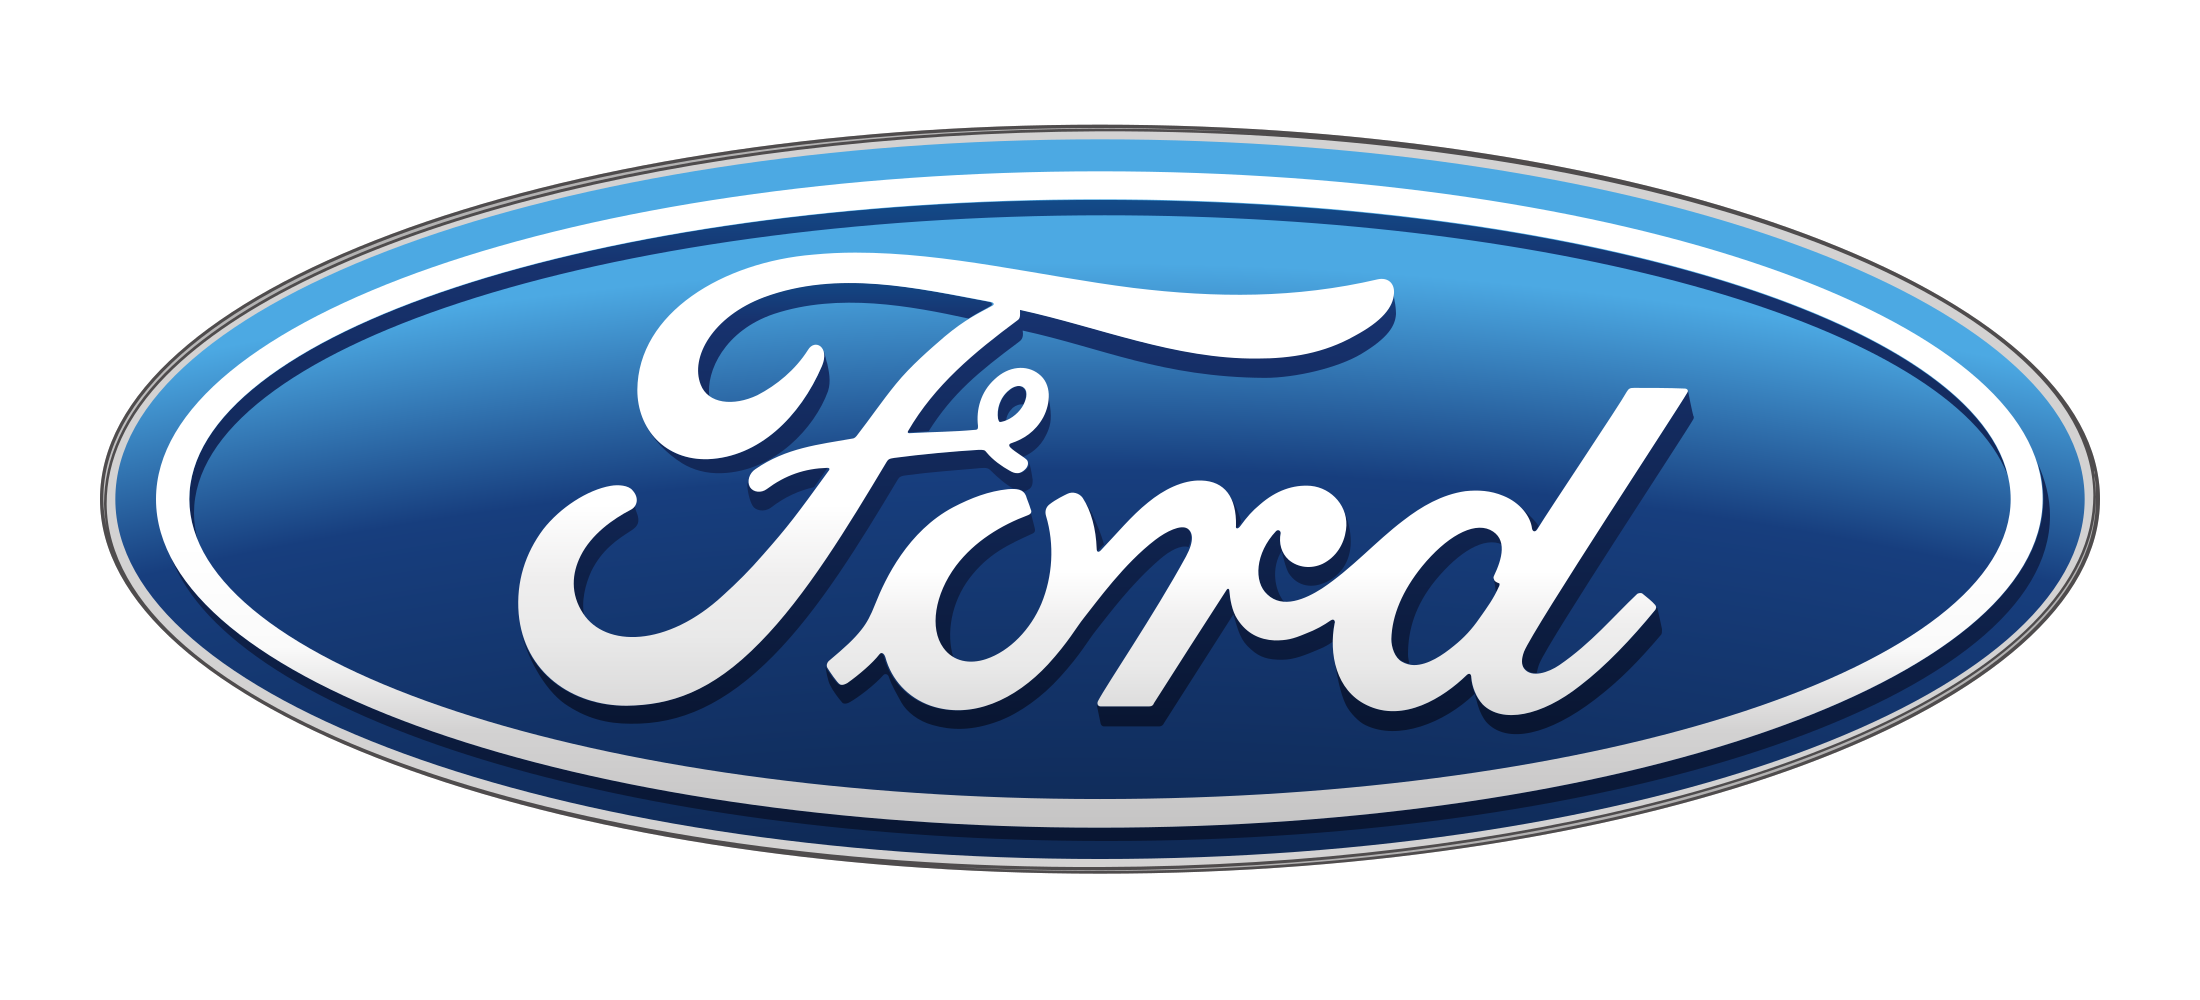 Ford Motor Company Ford Musta